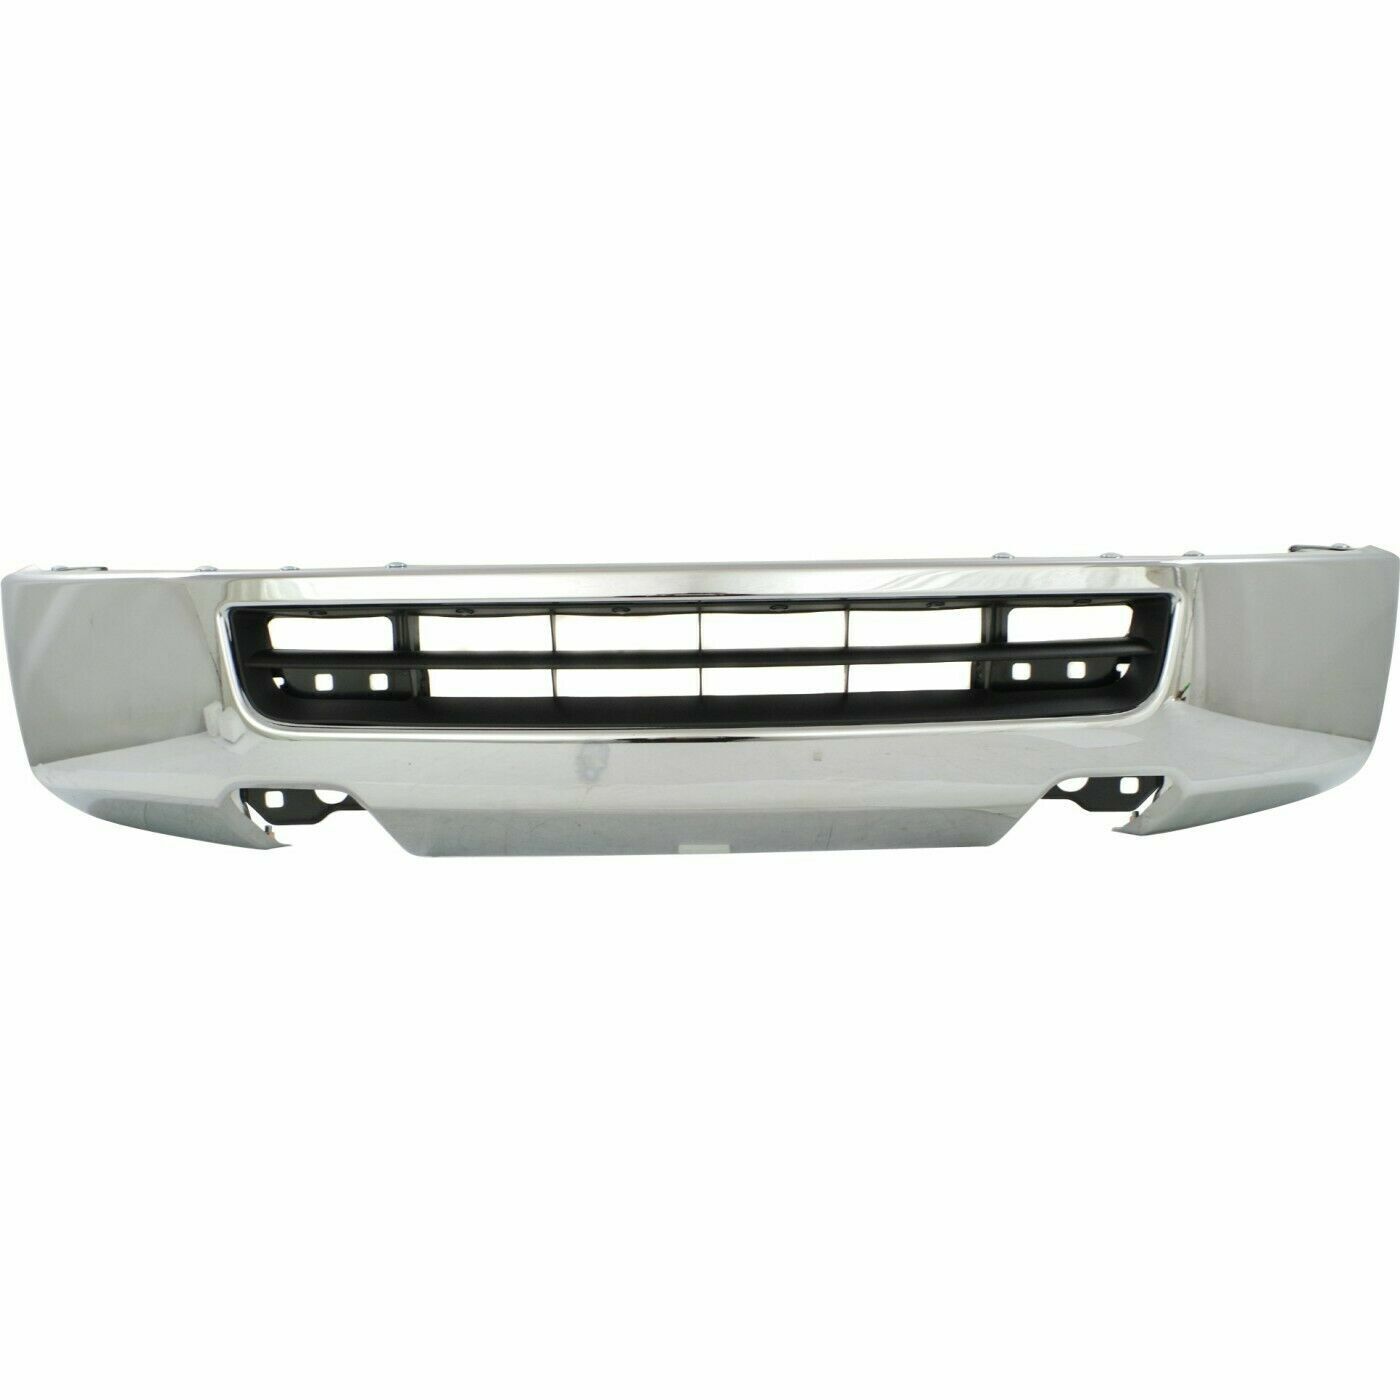 2012-2021 NISSAN NV1500; Front bumper; SV/SV HIGH ROOF w/Appearance Pkg w/Grille Insert w/Bracket CHR Painted to Match